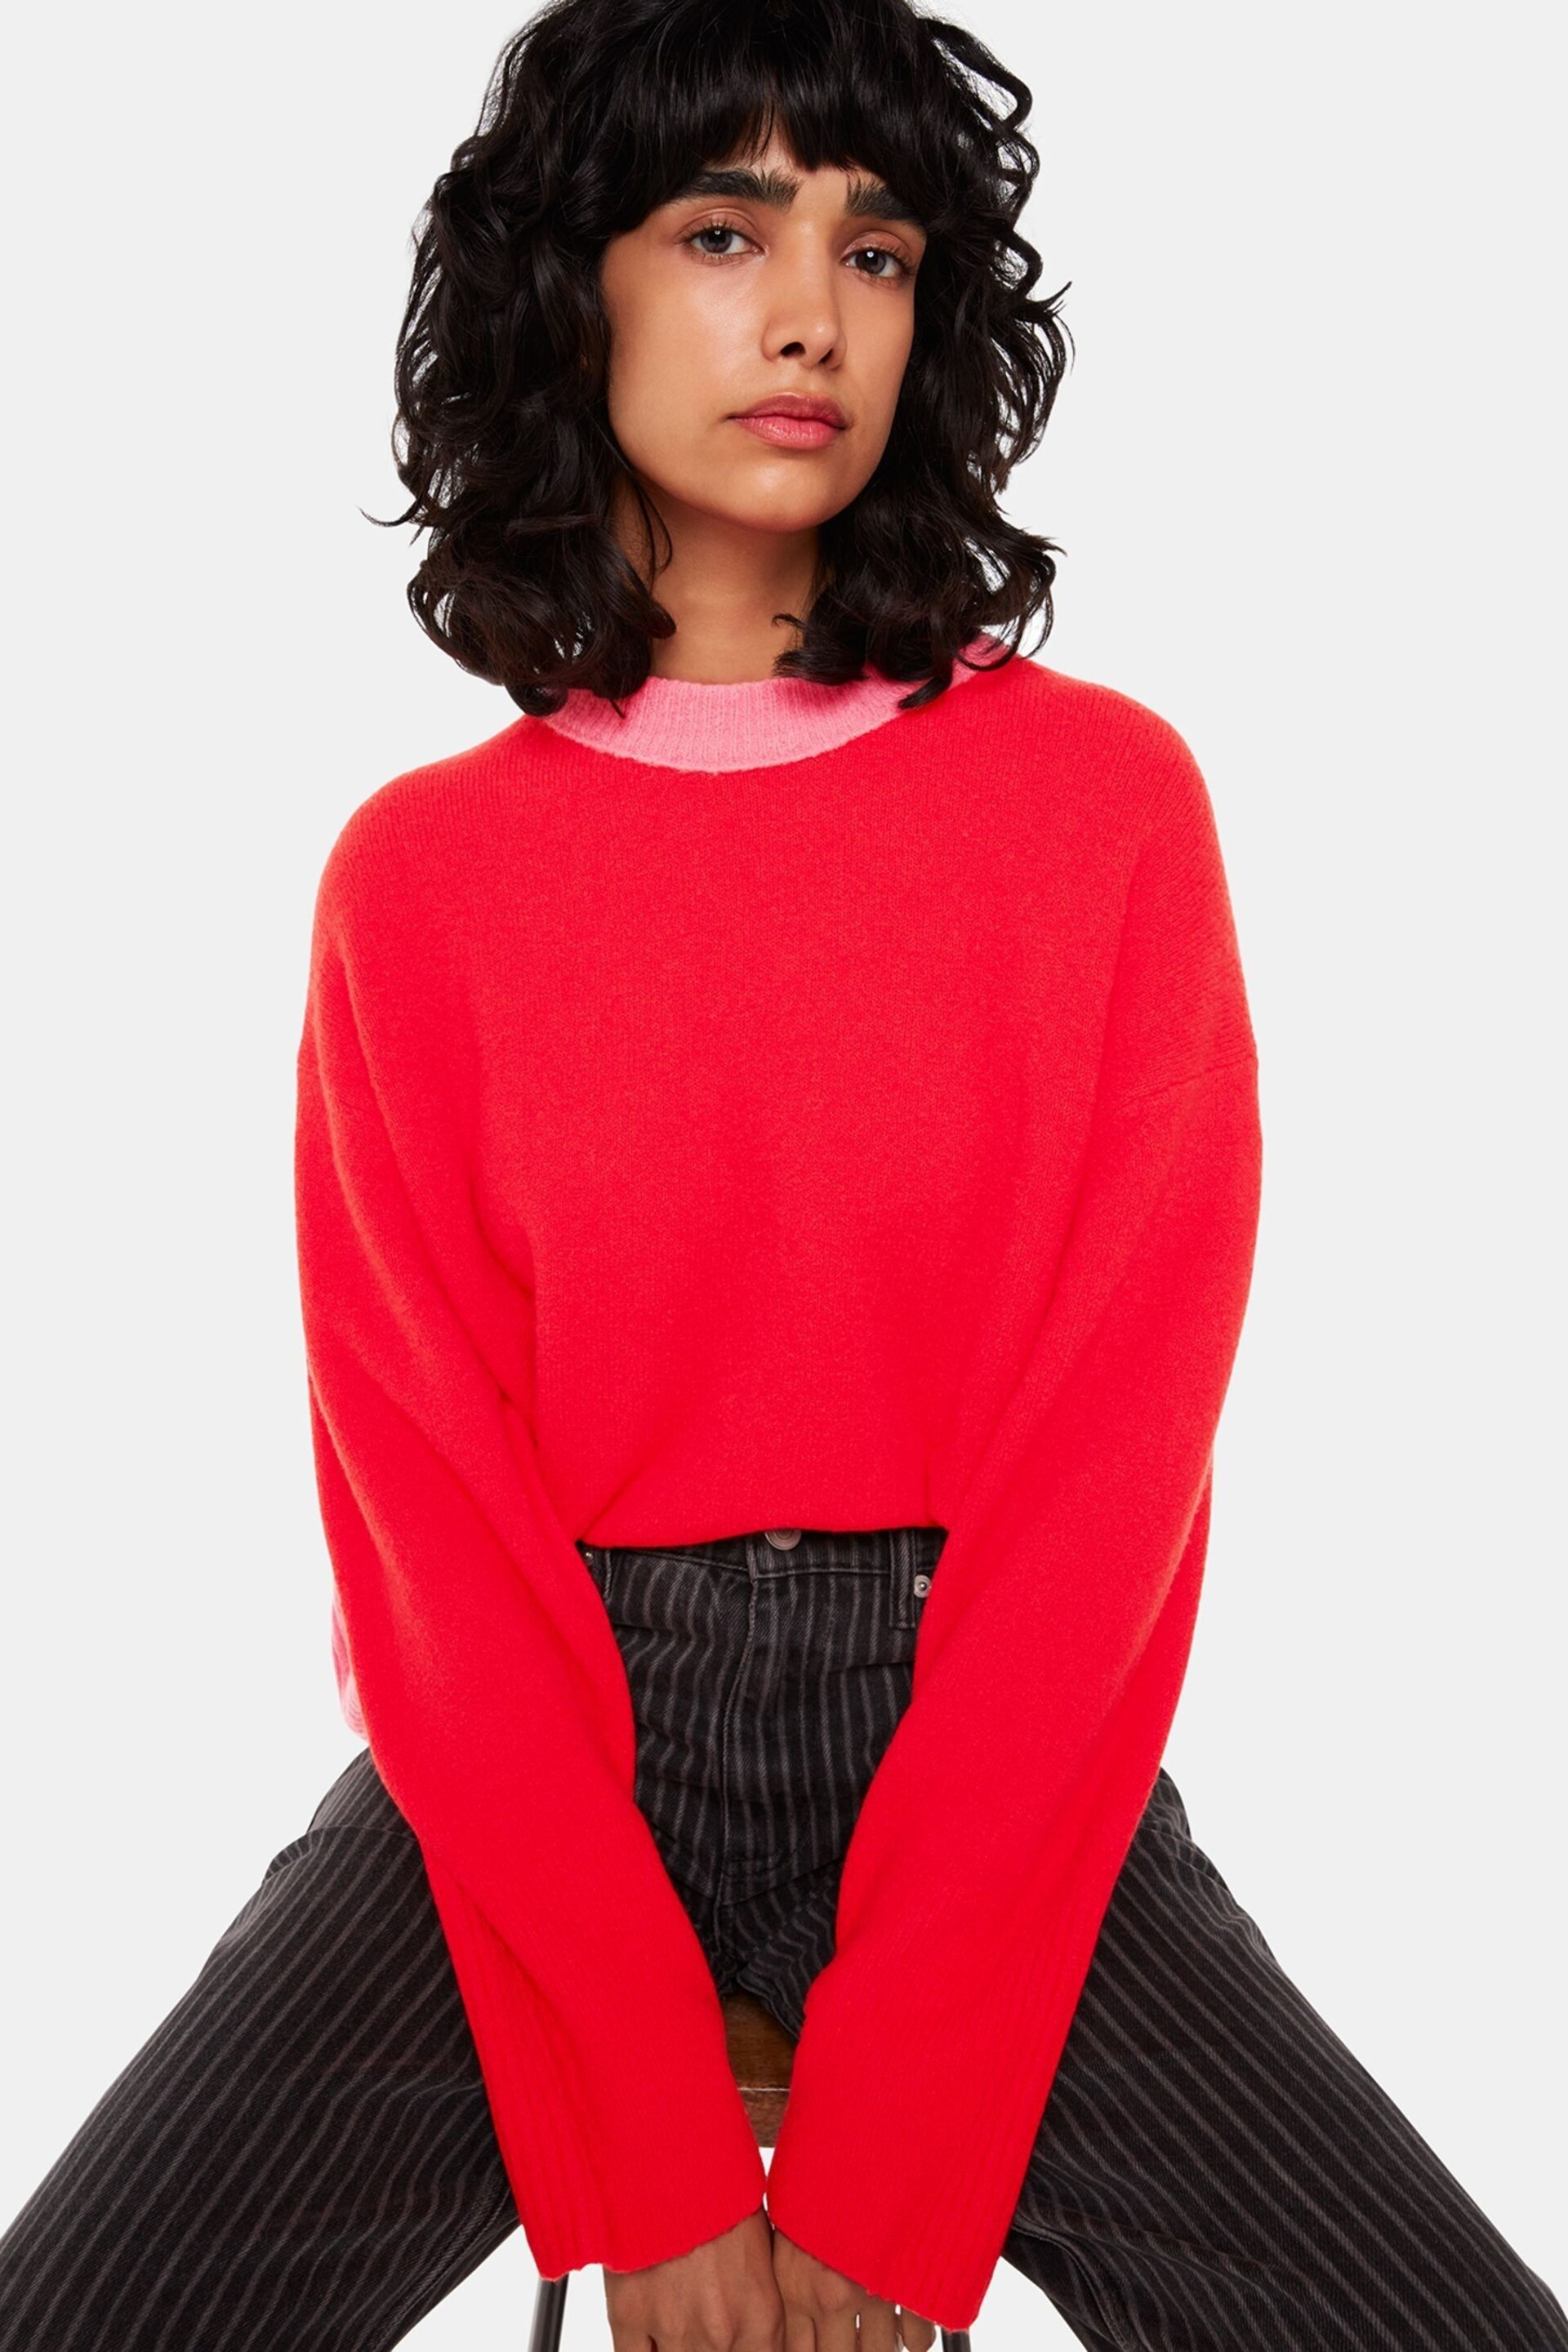 Whistles Red Colourblock Crew Neck Knit Jumper - Image 1 of 5